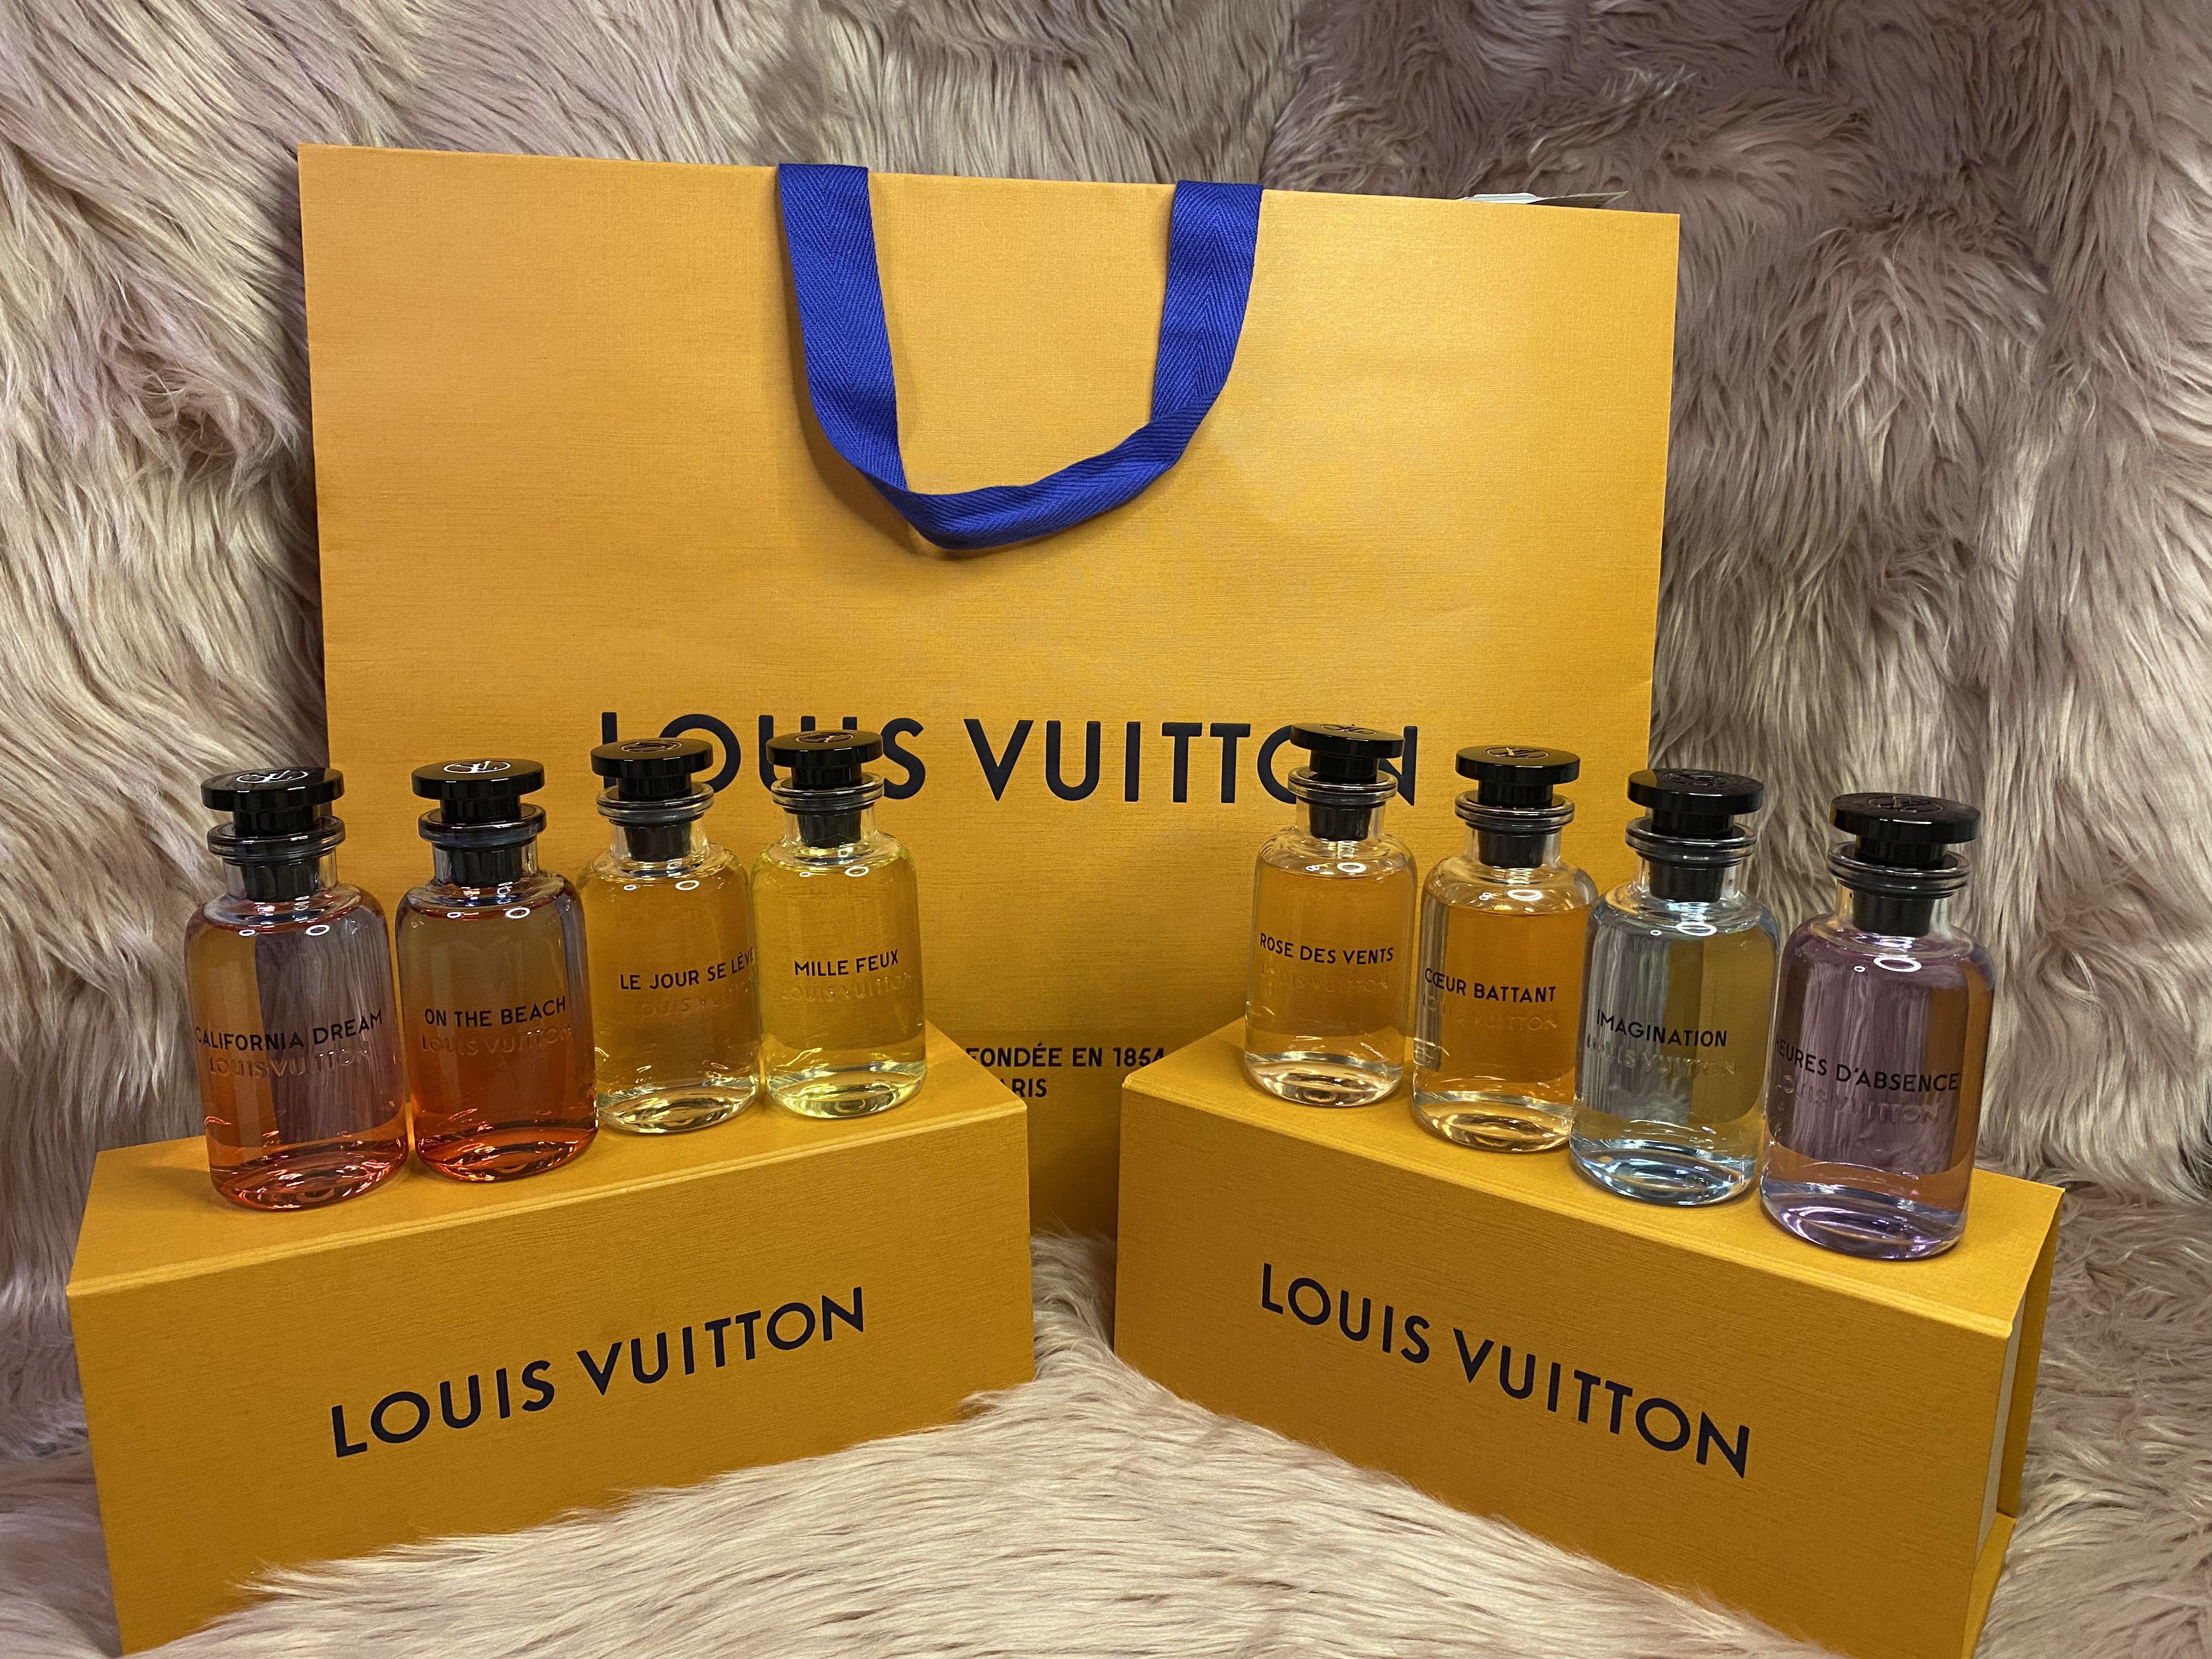 Unboxing of LV Coeur Battant Travel Spray! (Love this scent so